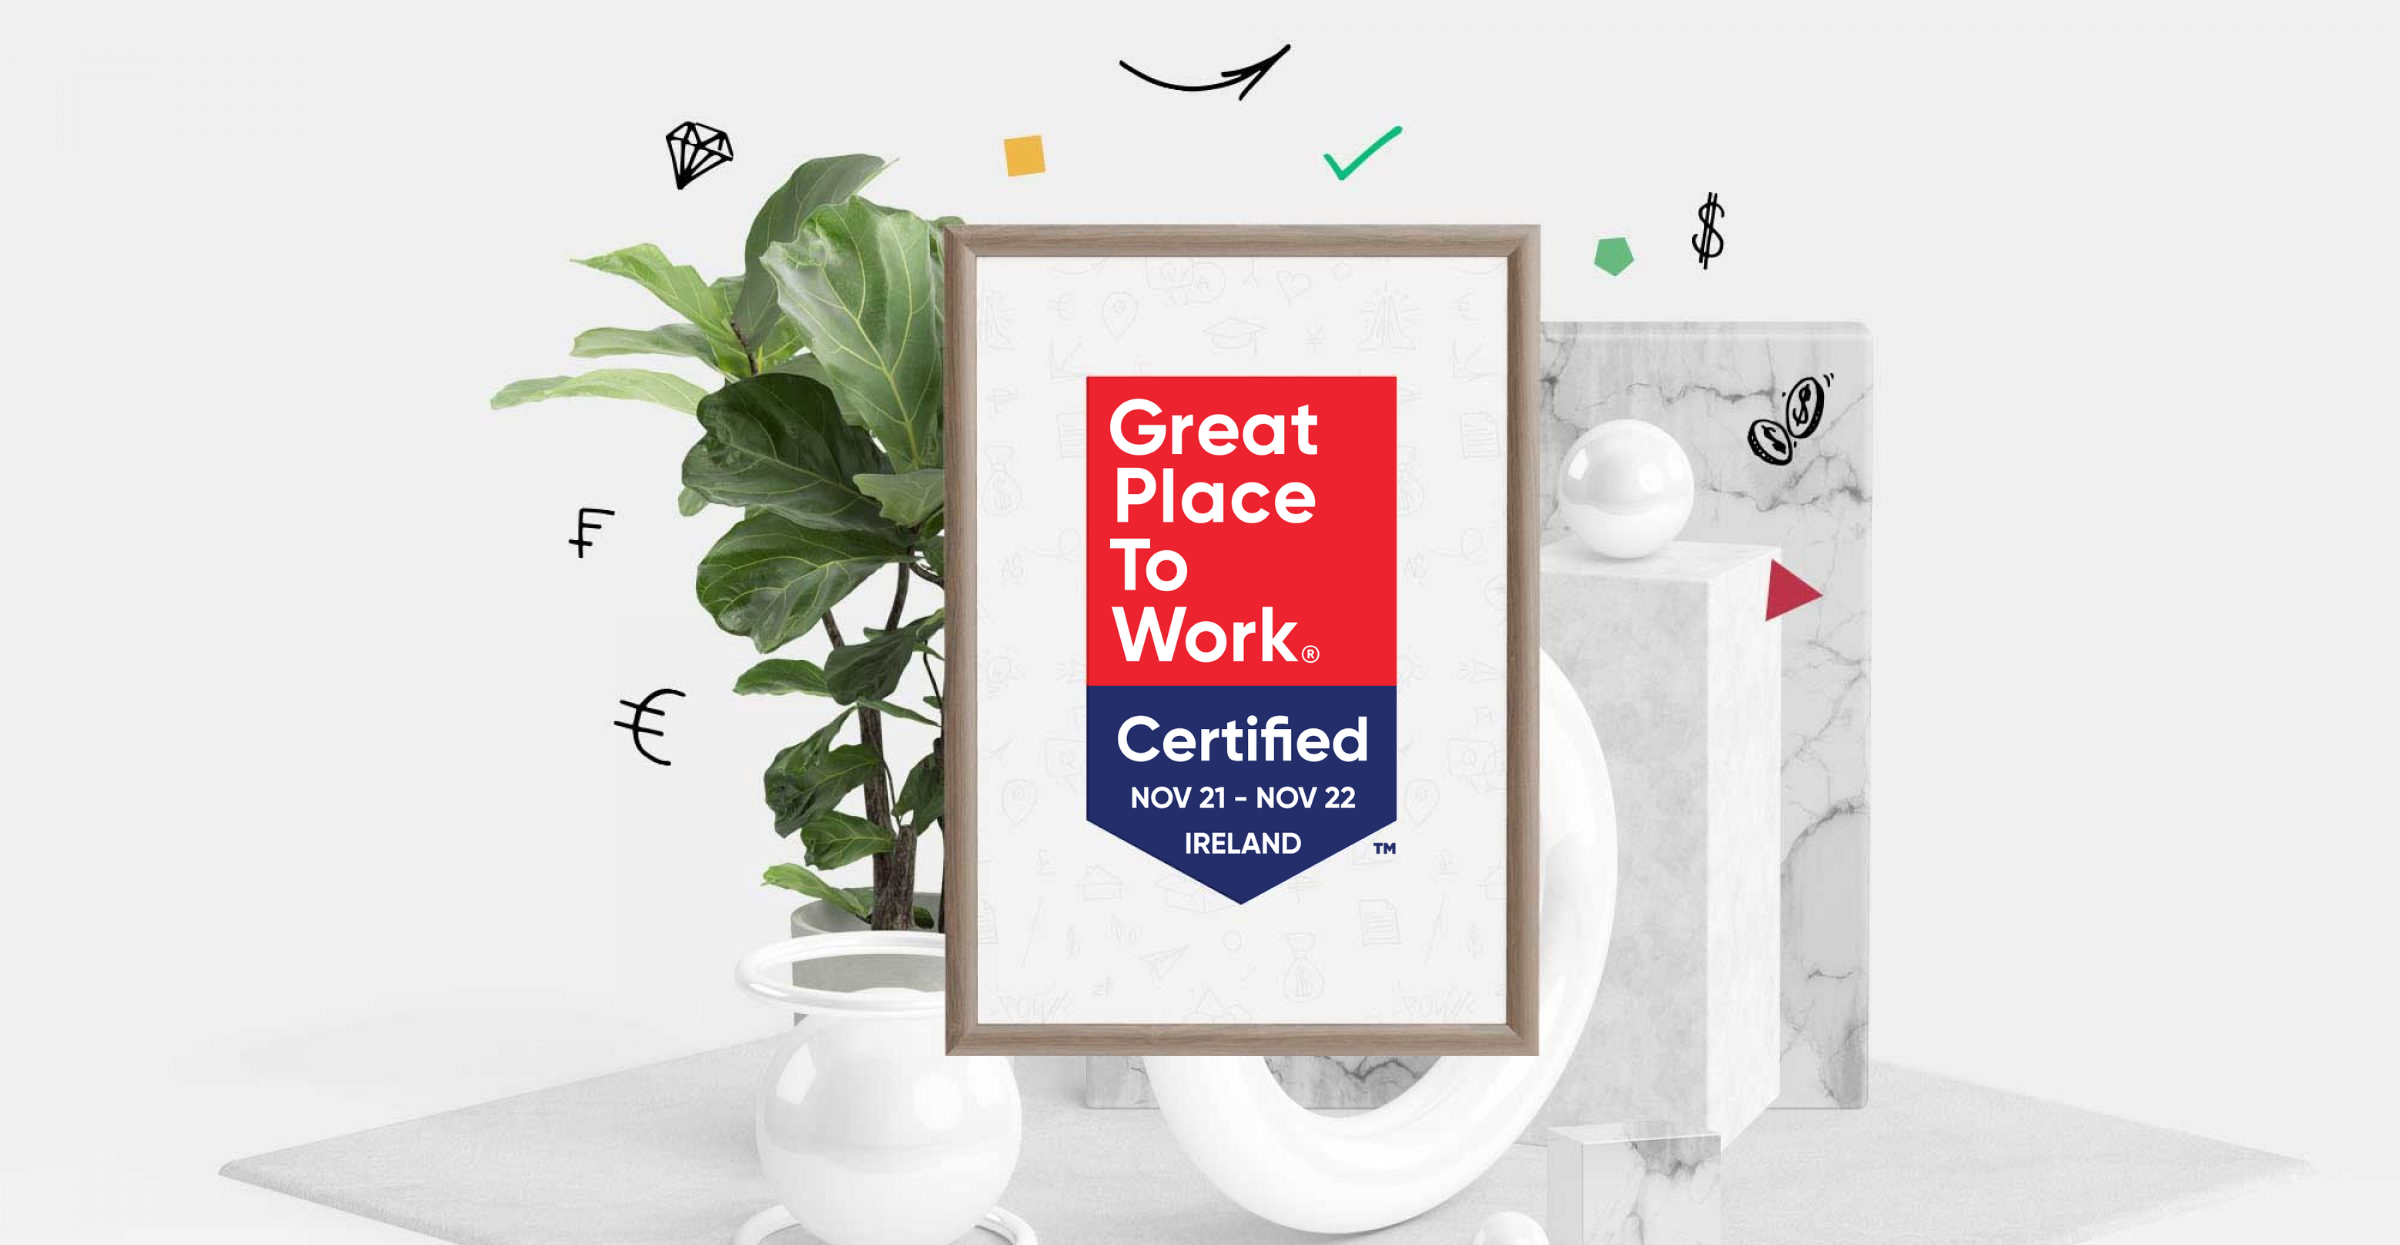 We’re Certified as a Great Place to Work® for 2022